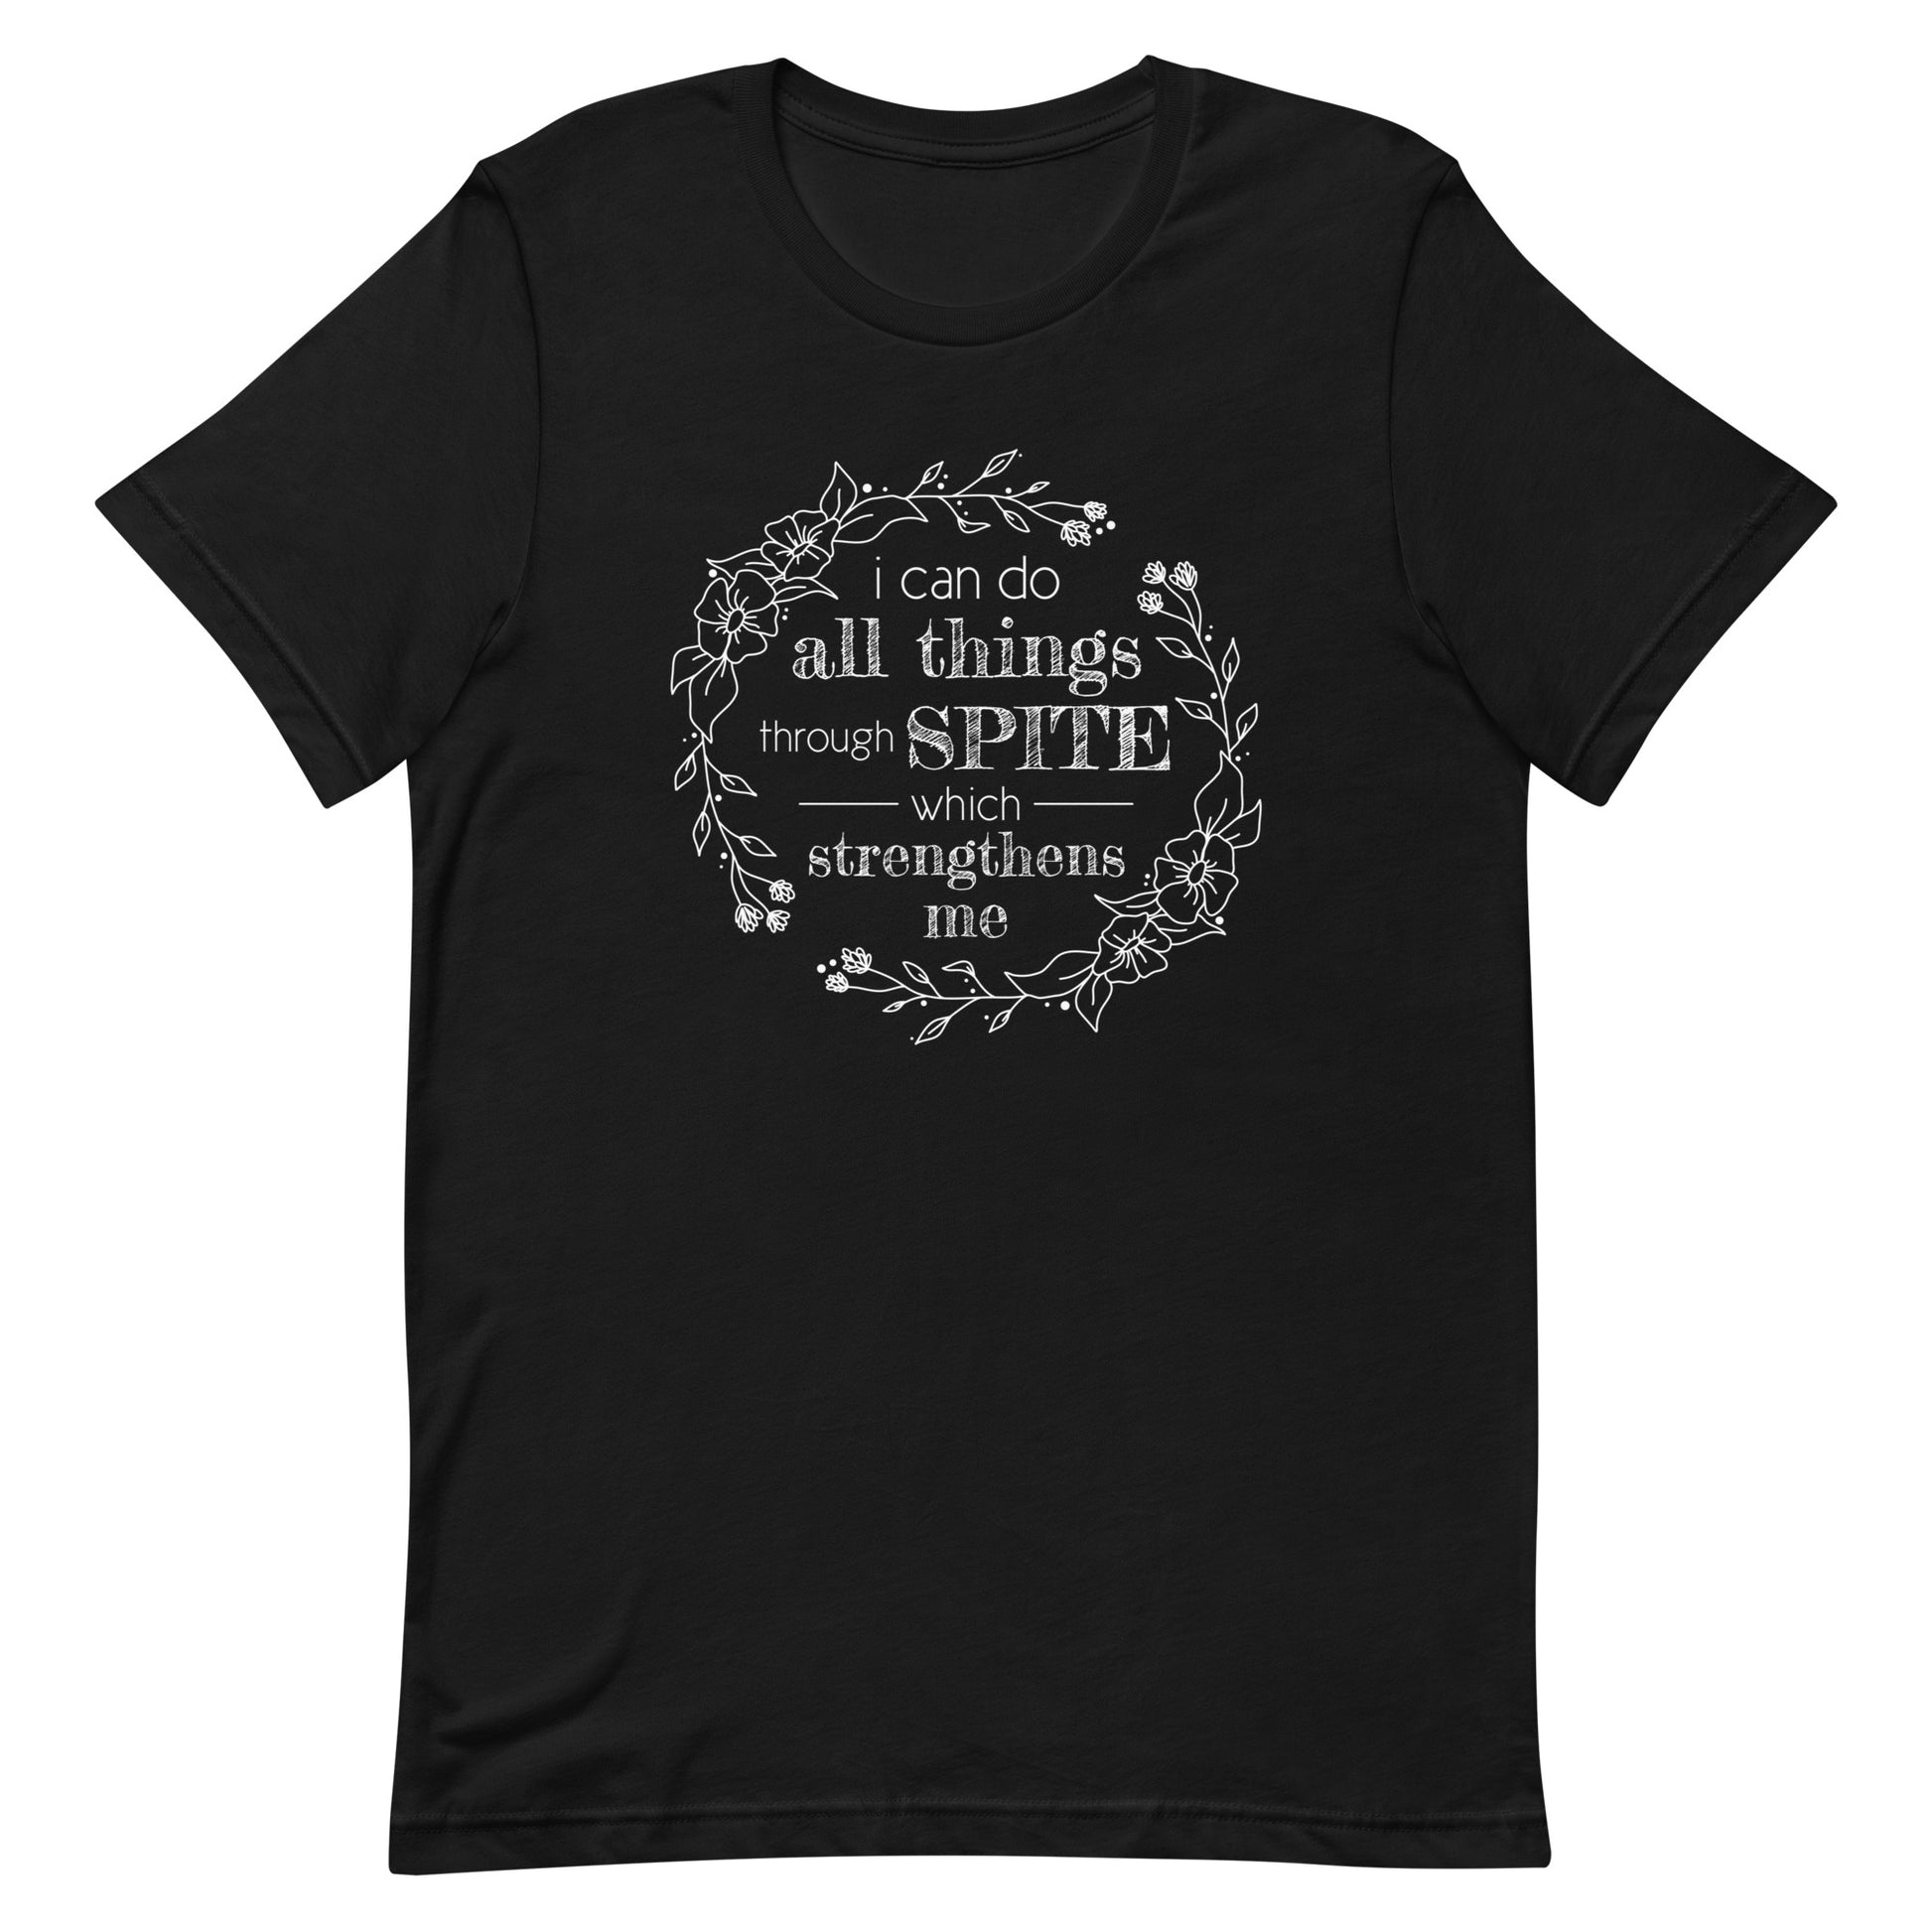 A black crewneck t-shirt with an illustration of a wreath of flowers. Inside the wreath is text that reads "I can do all things through spite which strengthens me"